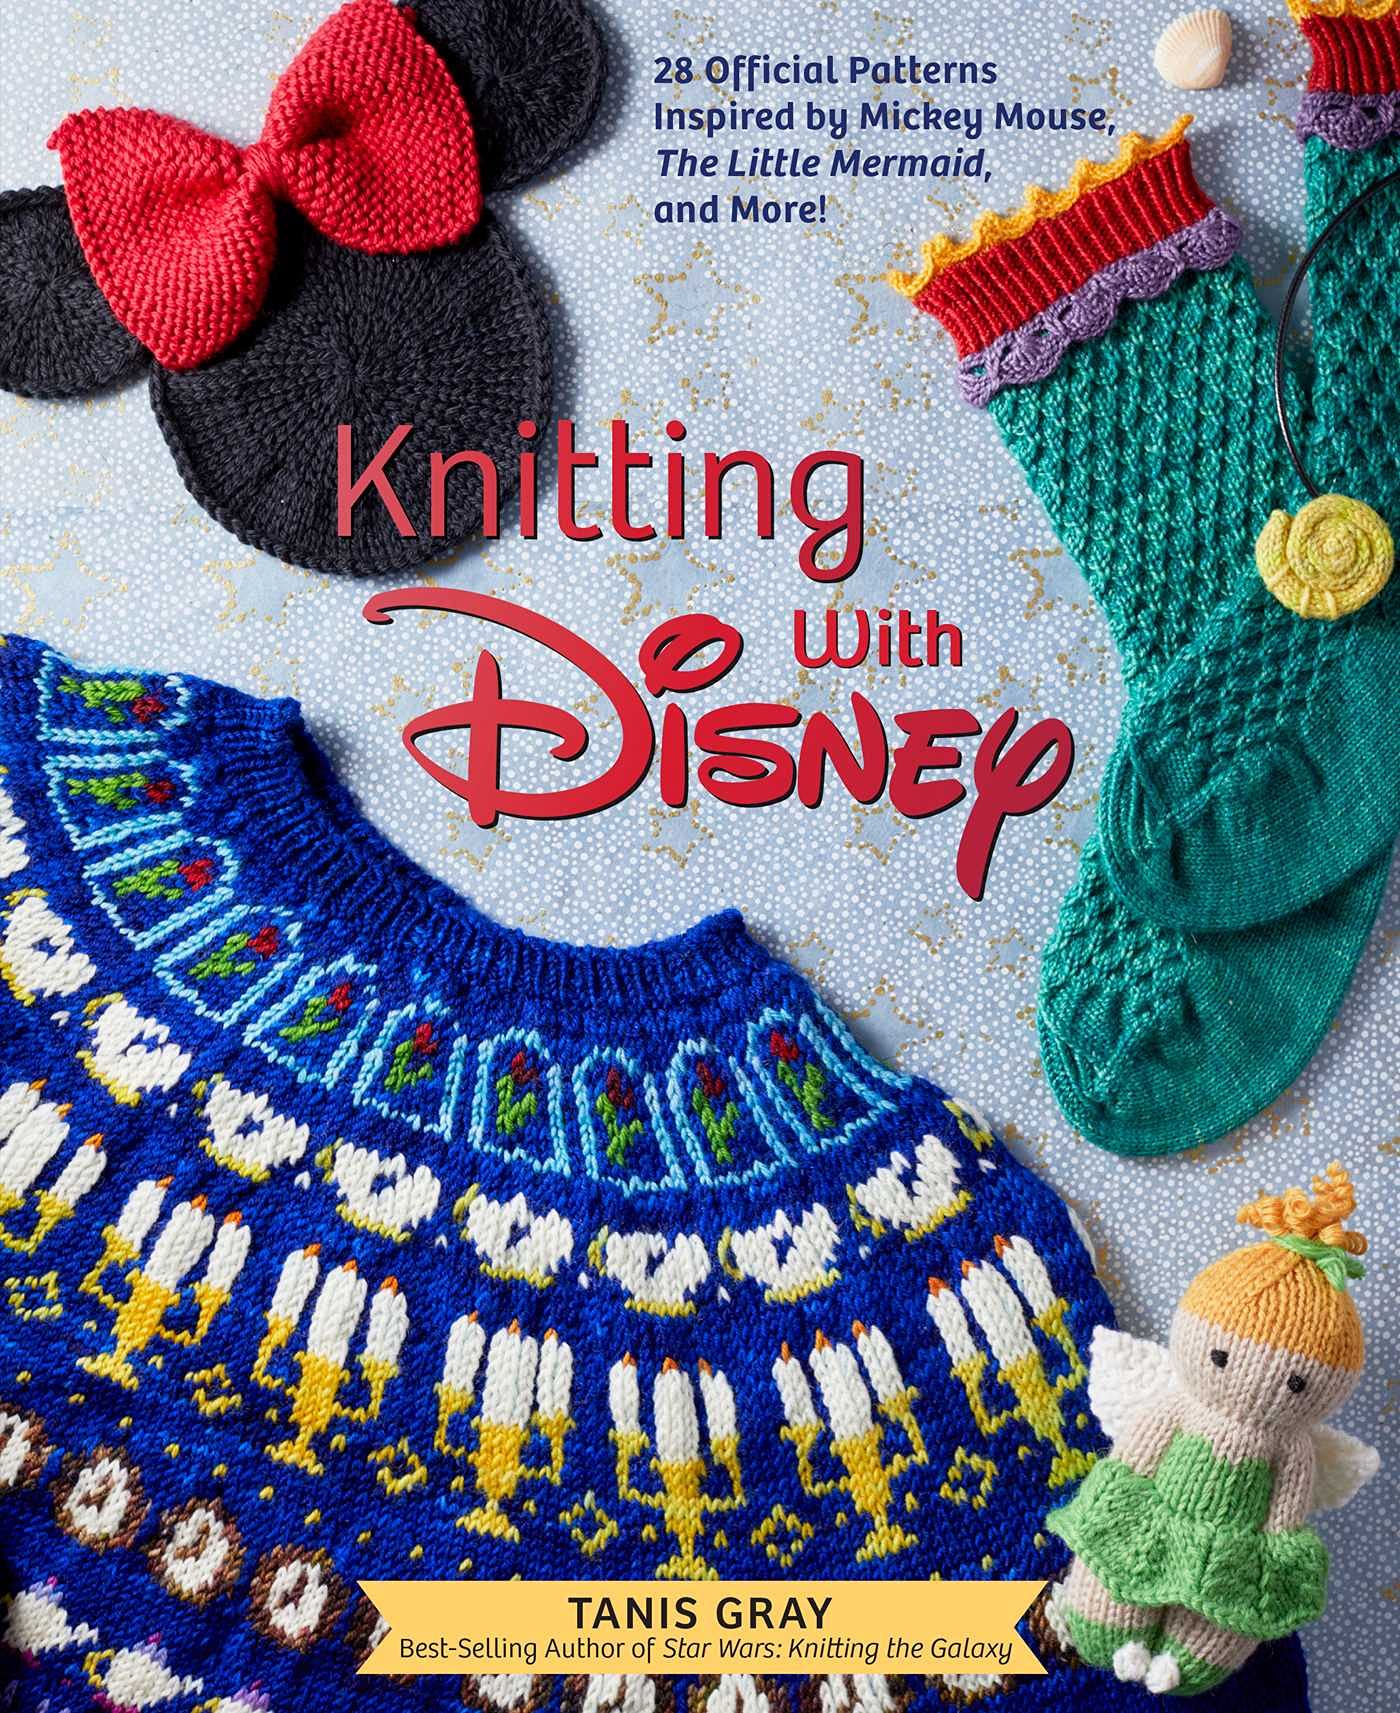 Image for "Knitting with Disney"